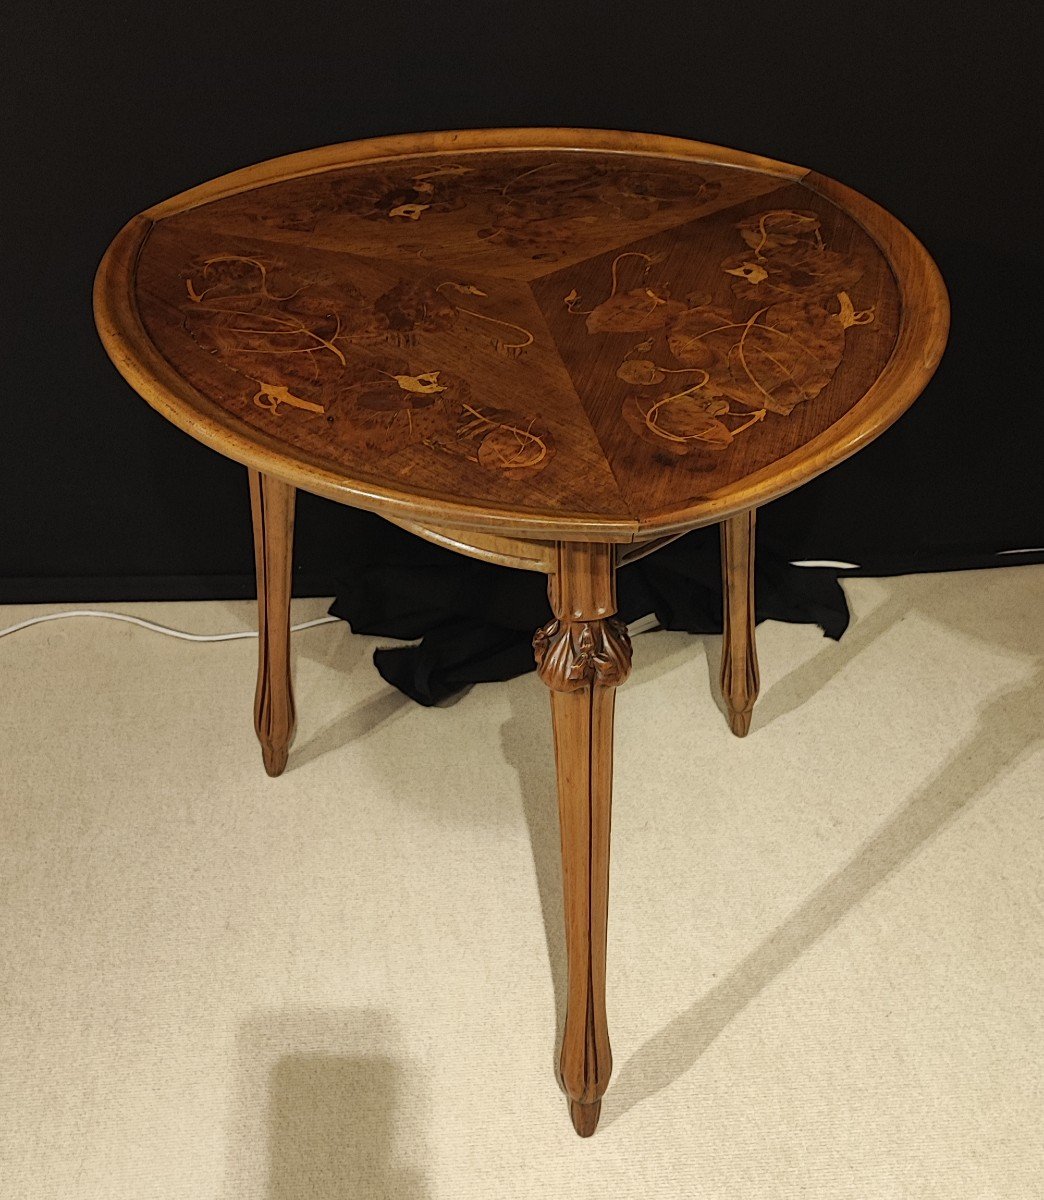 Louis Majorelle - Tripod Pedestal Table In Solid Walnut Decorated With Aristolochia Leaves